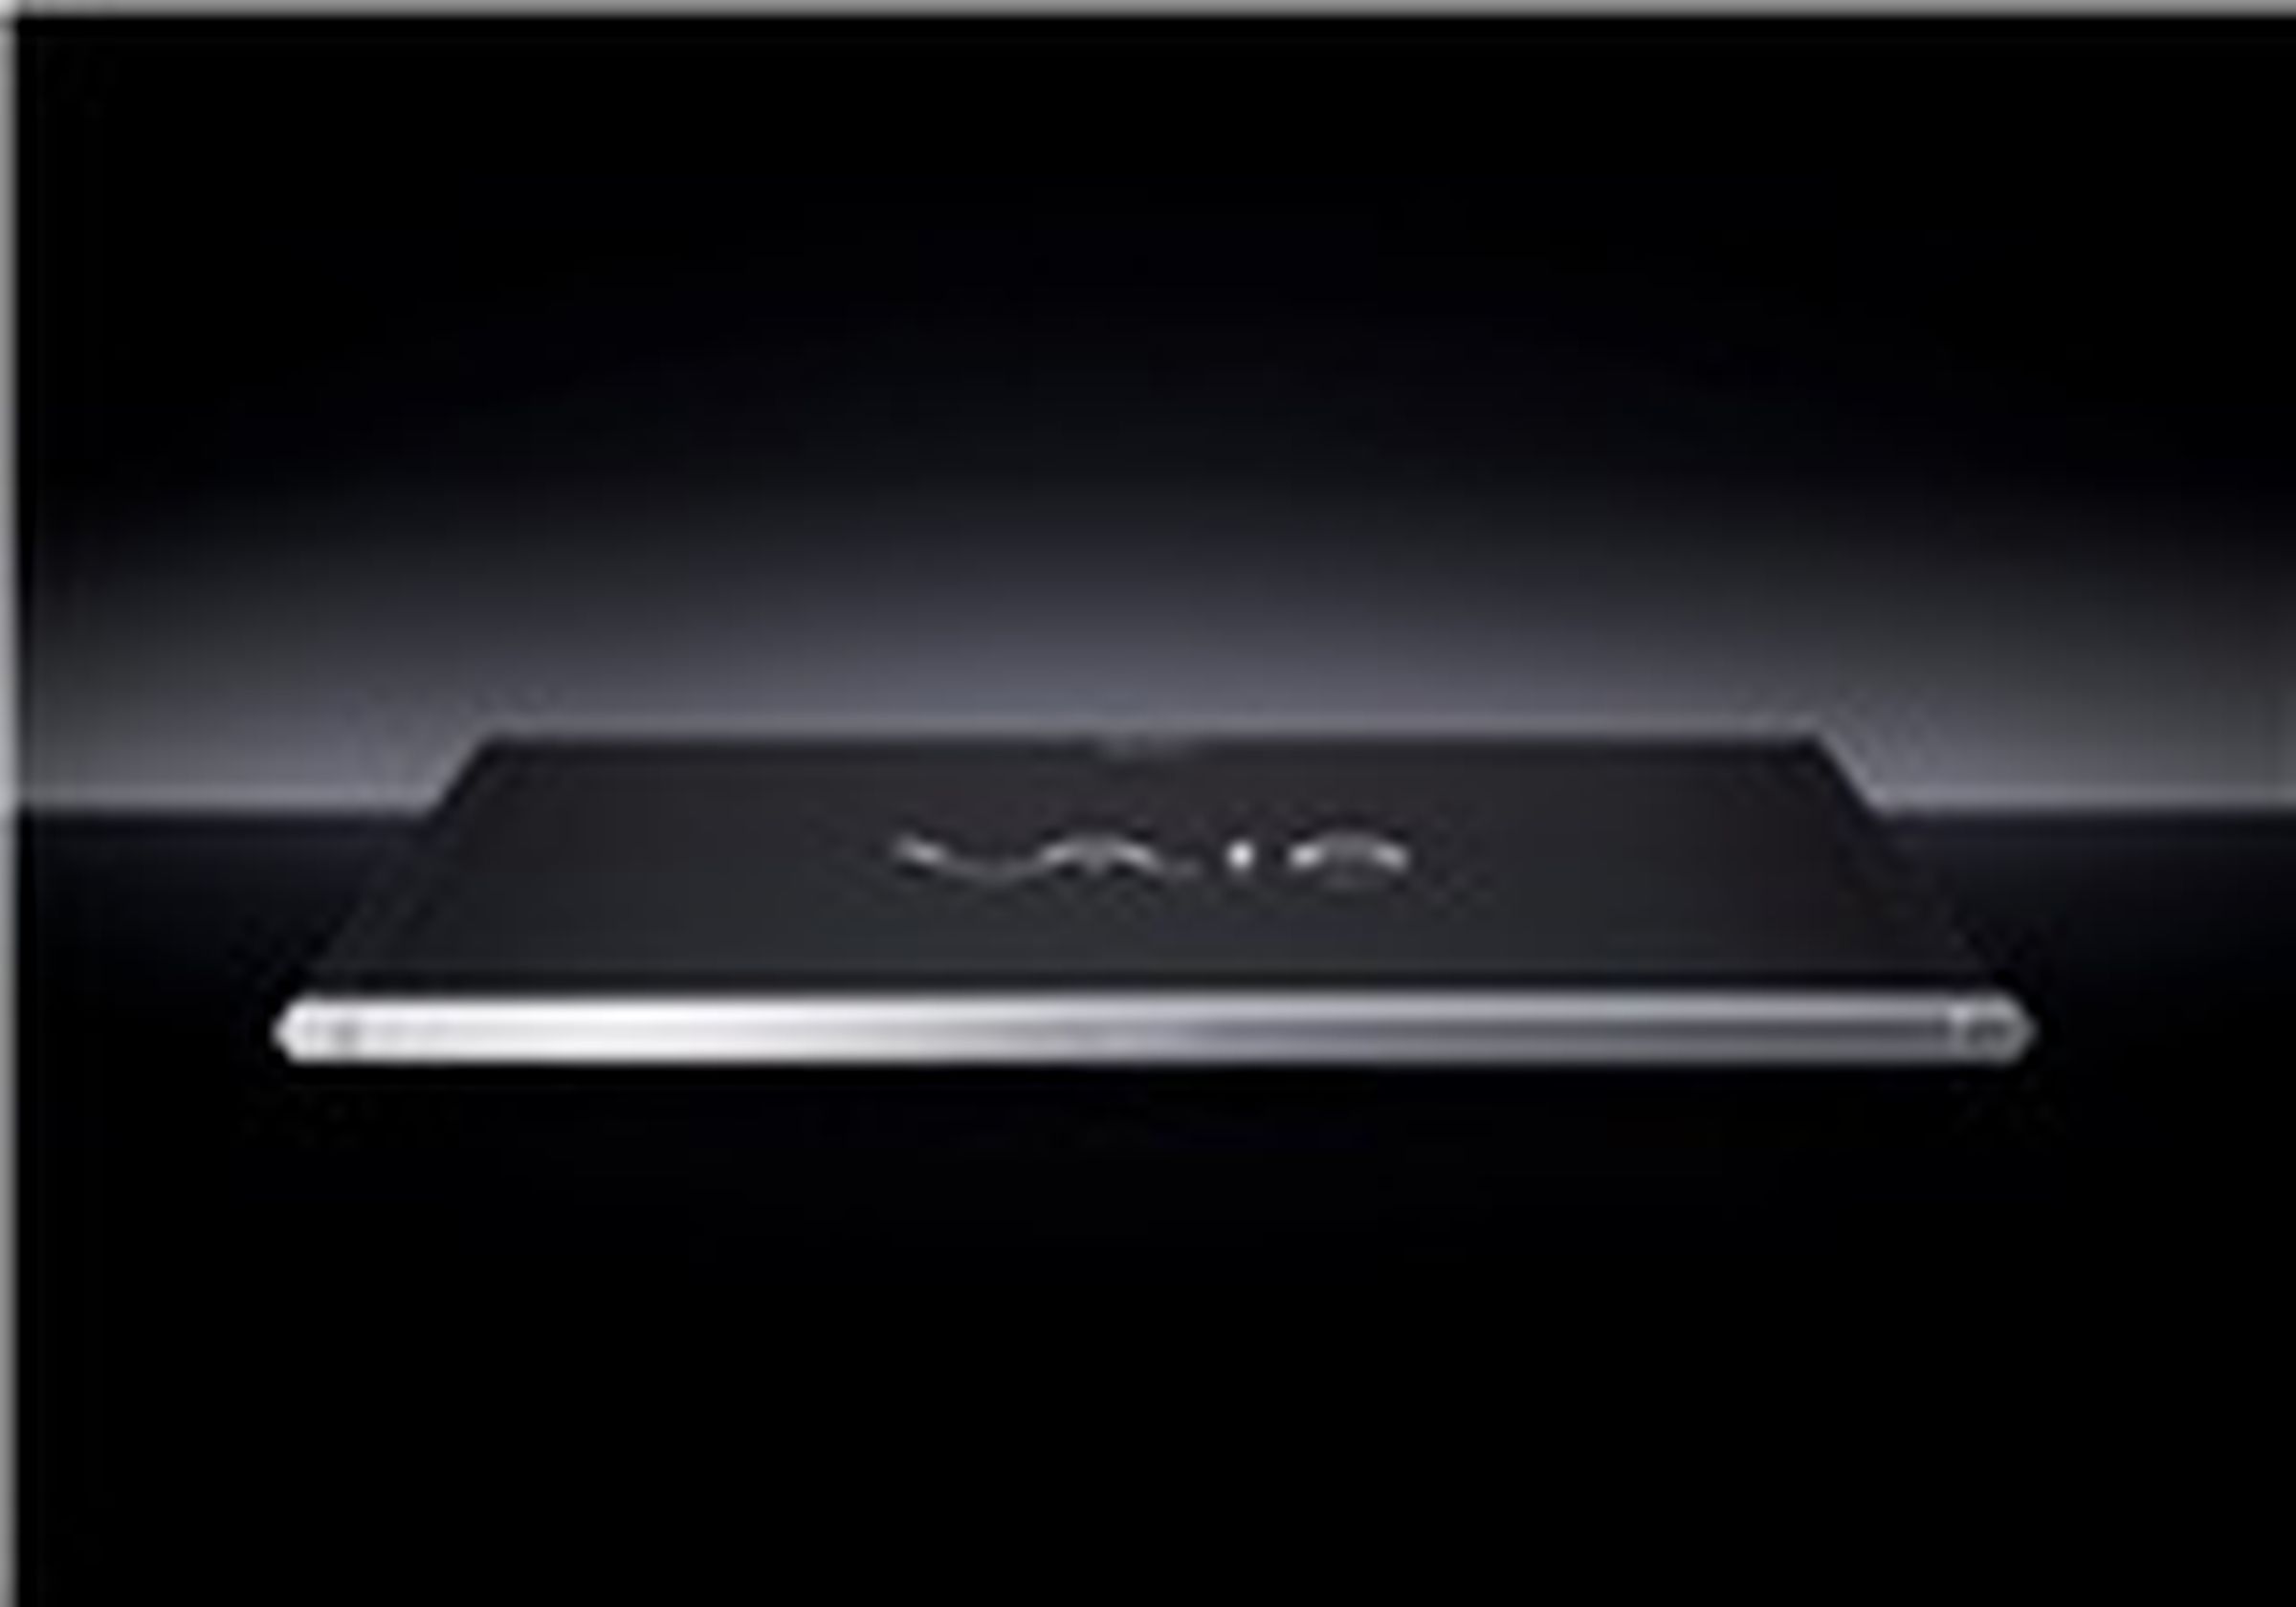 Sony Vaio Z official images